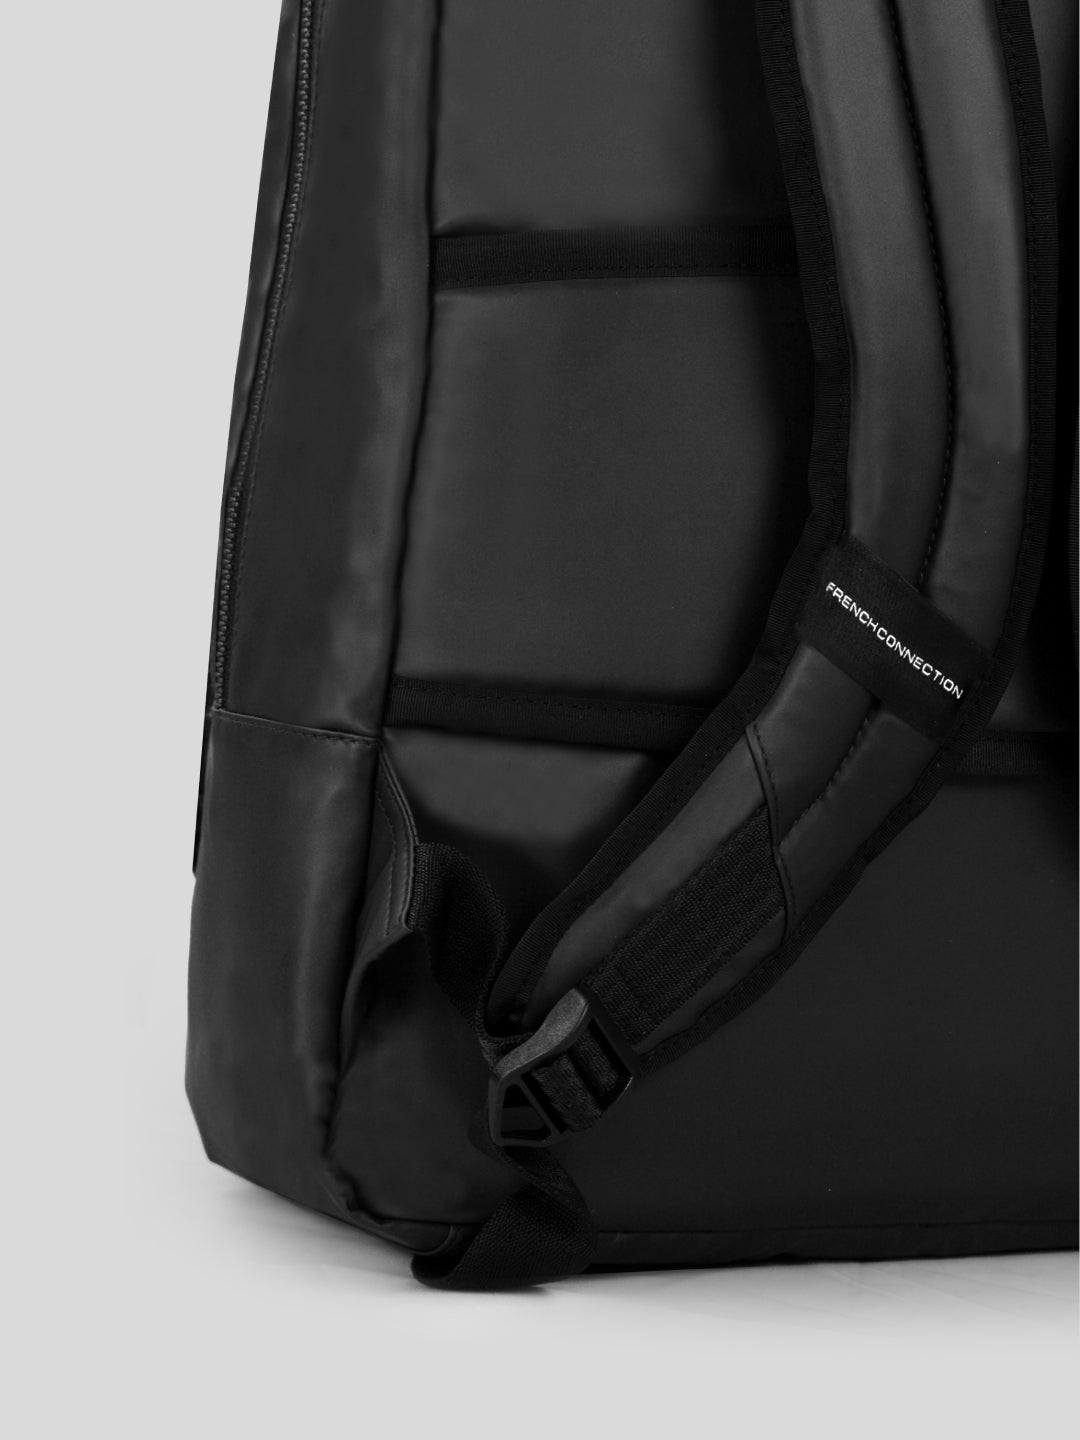 French Connection Black Backpack